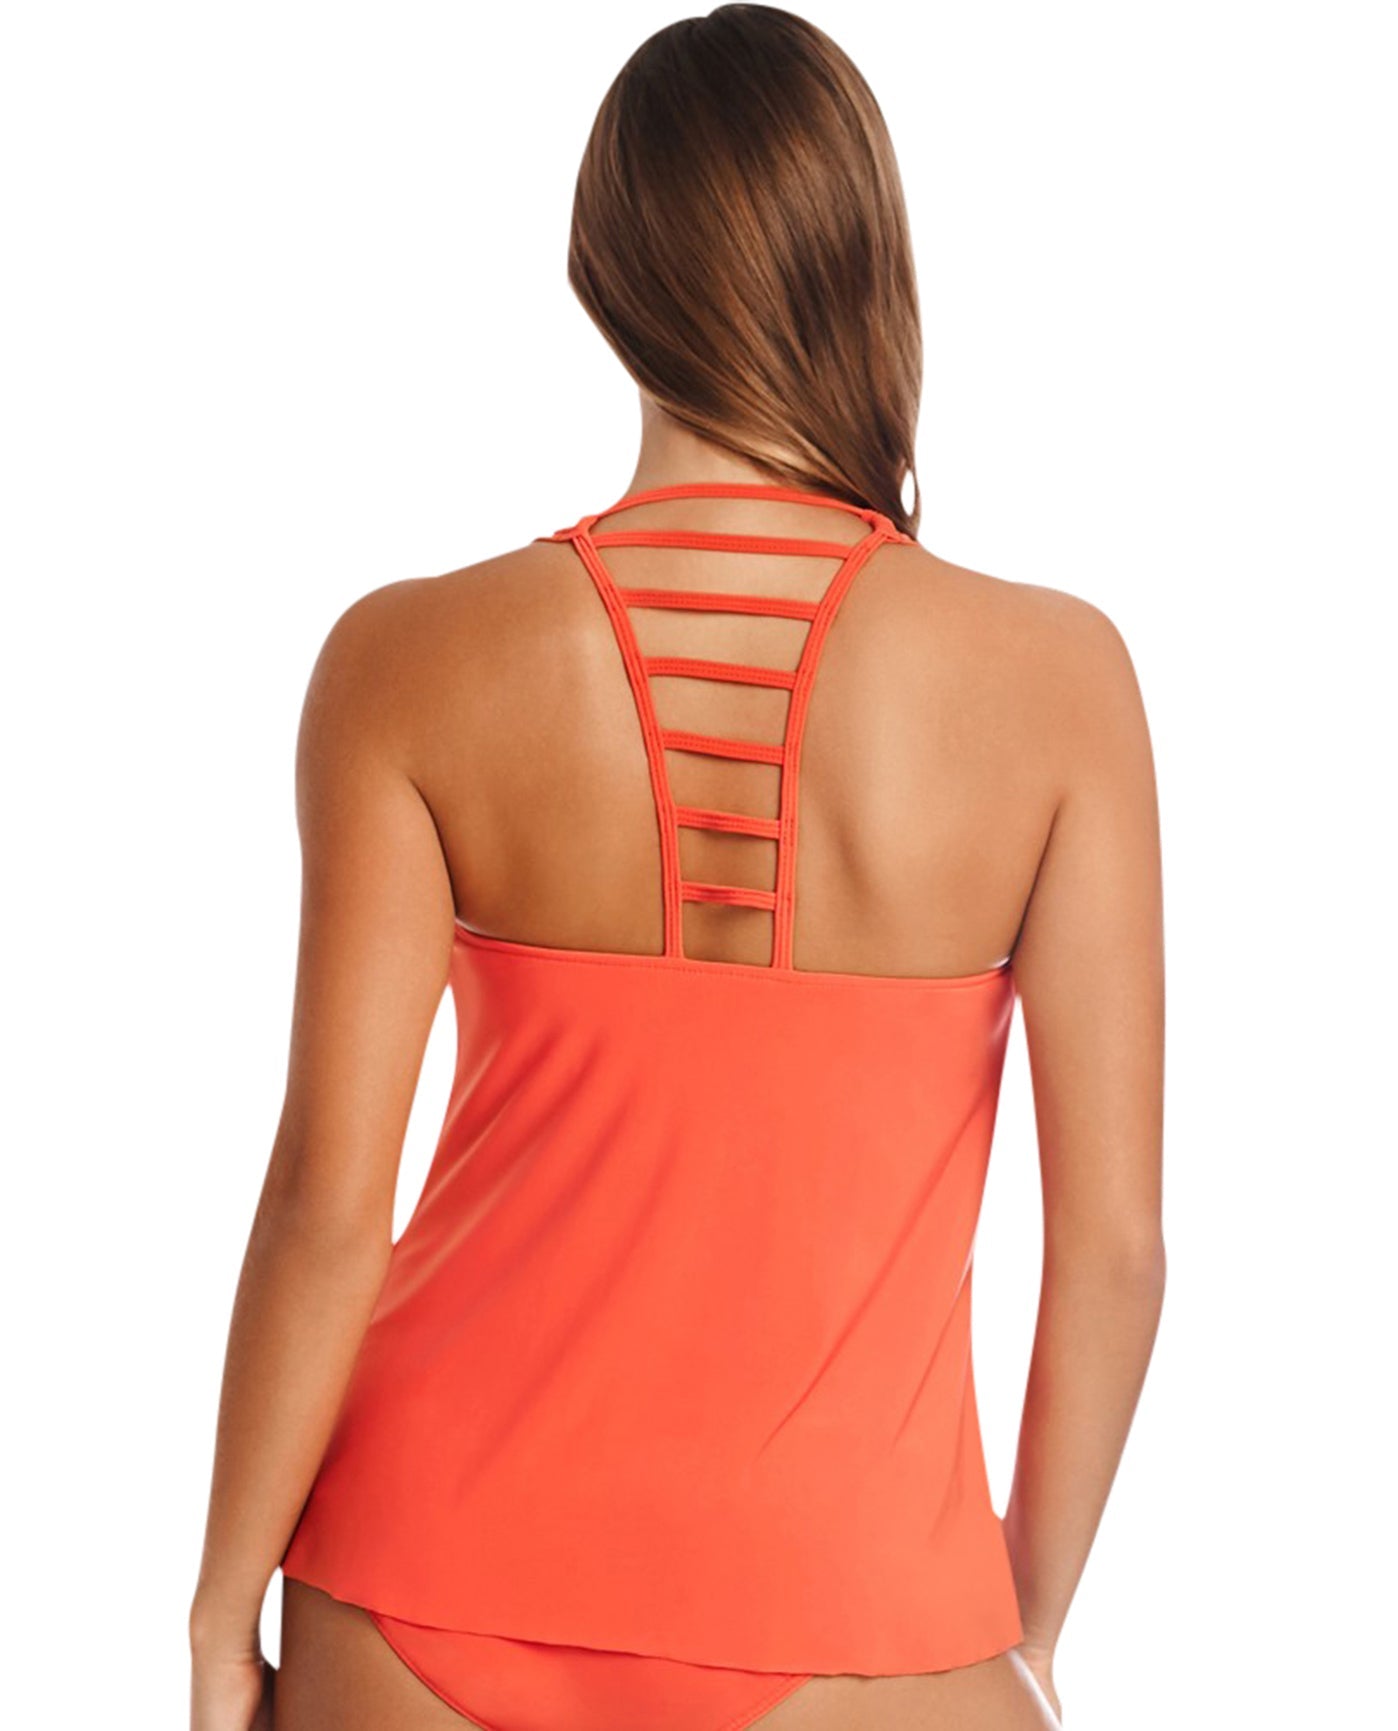 Back View Of Magicsuit Black Behind Bars Anna Cowl Neck Underwire Ladder Back Tankini Top  | MAG Coral